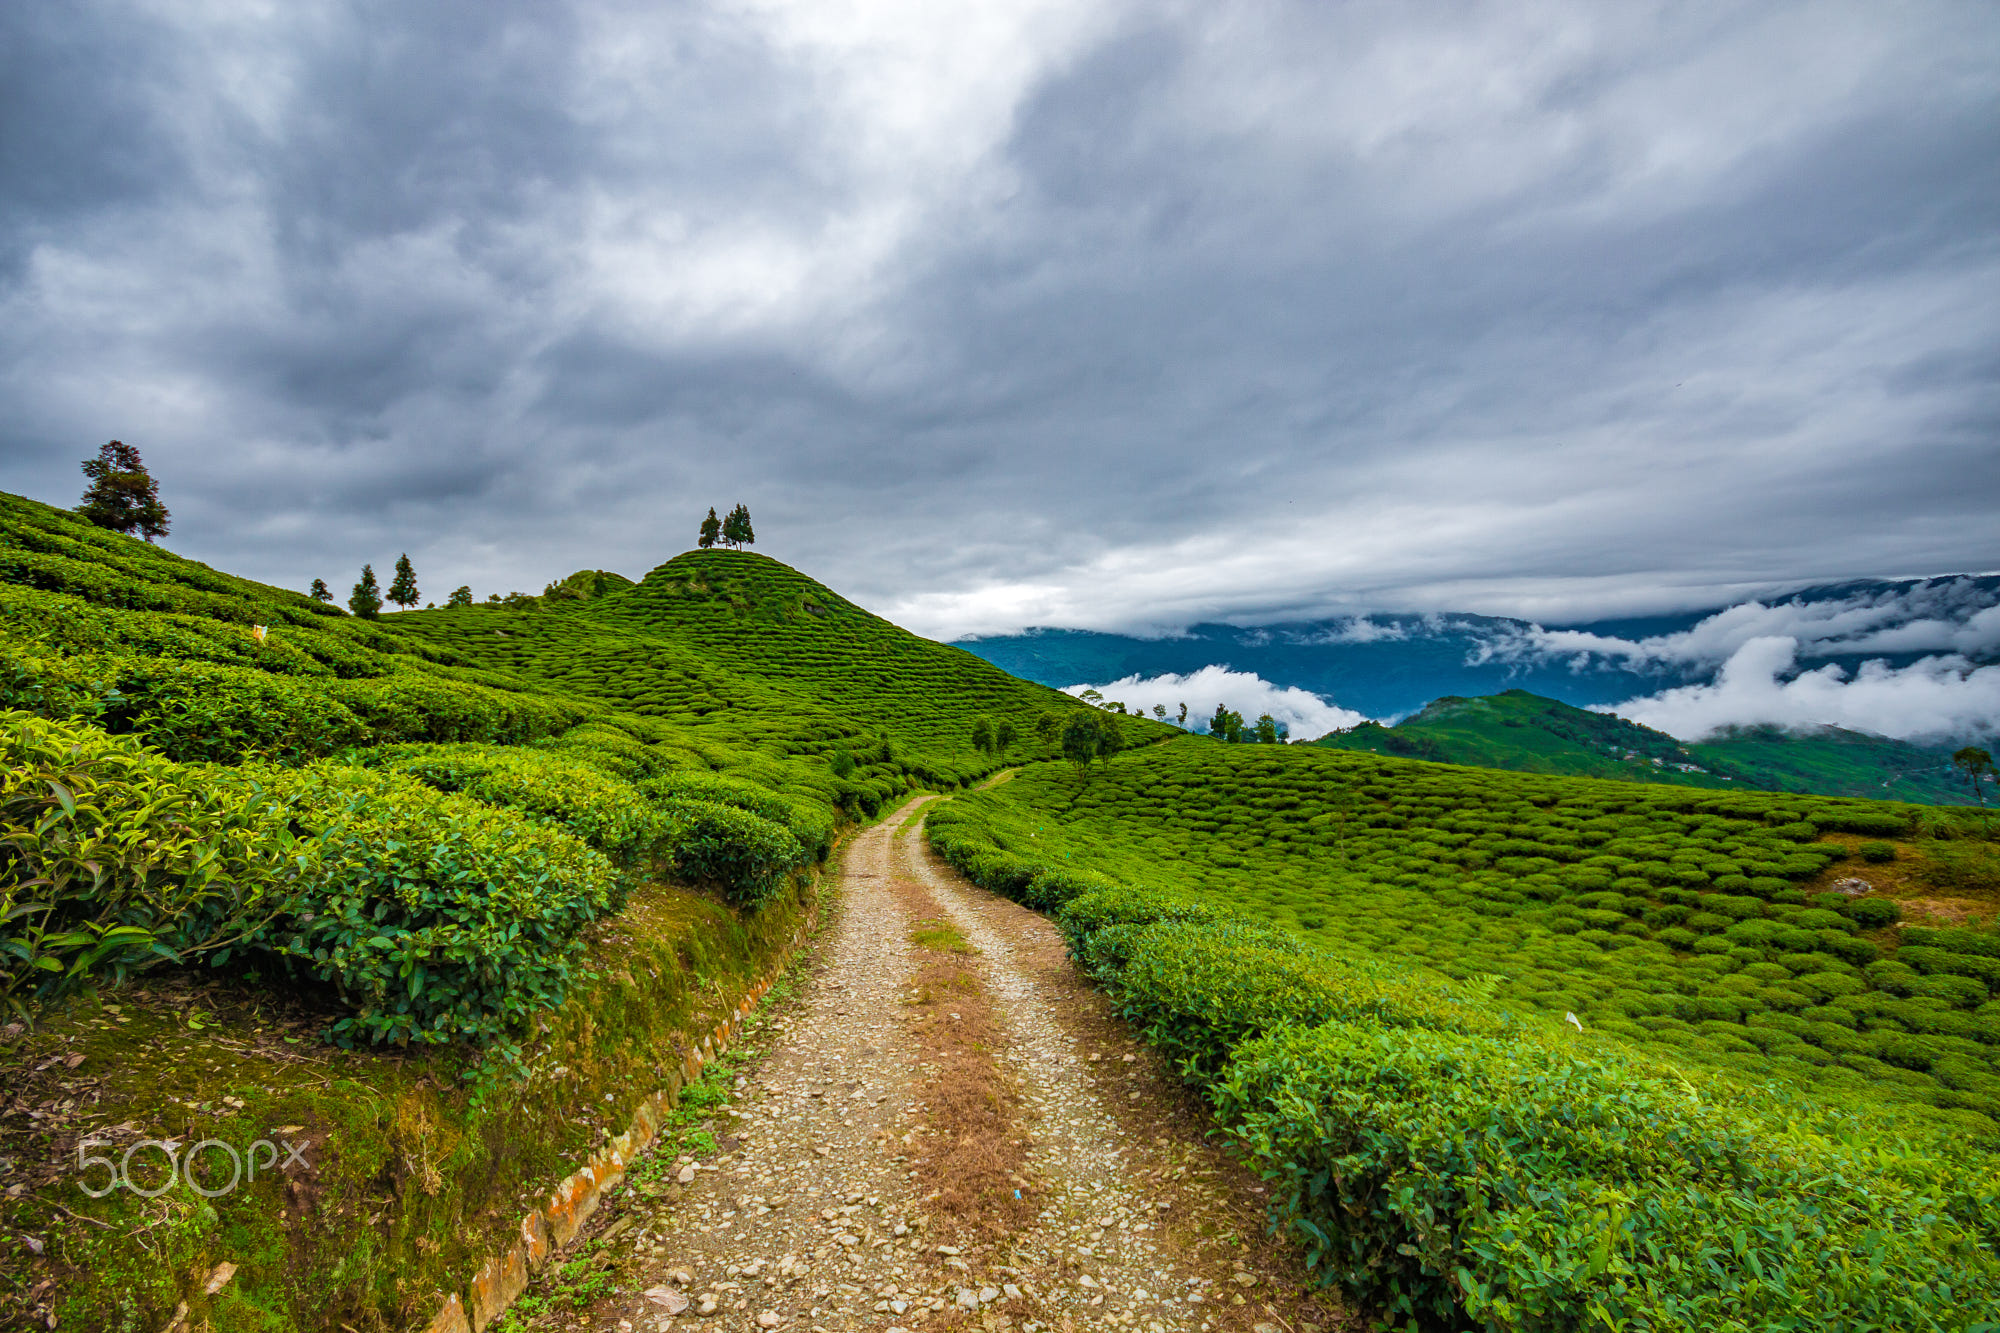 This Is A Place Where The World-Famous Tea Comes From, Darjeeling Tea Garden